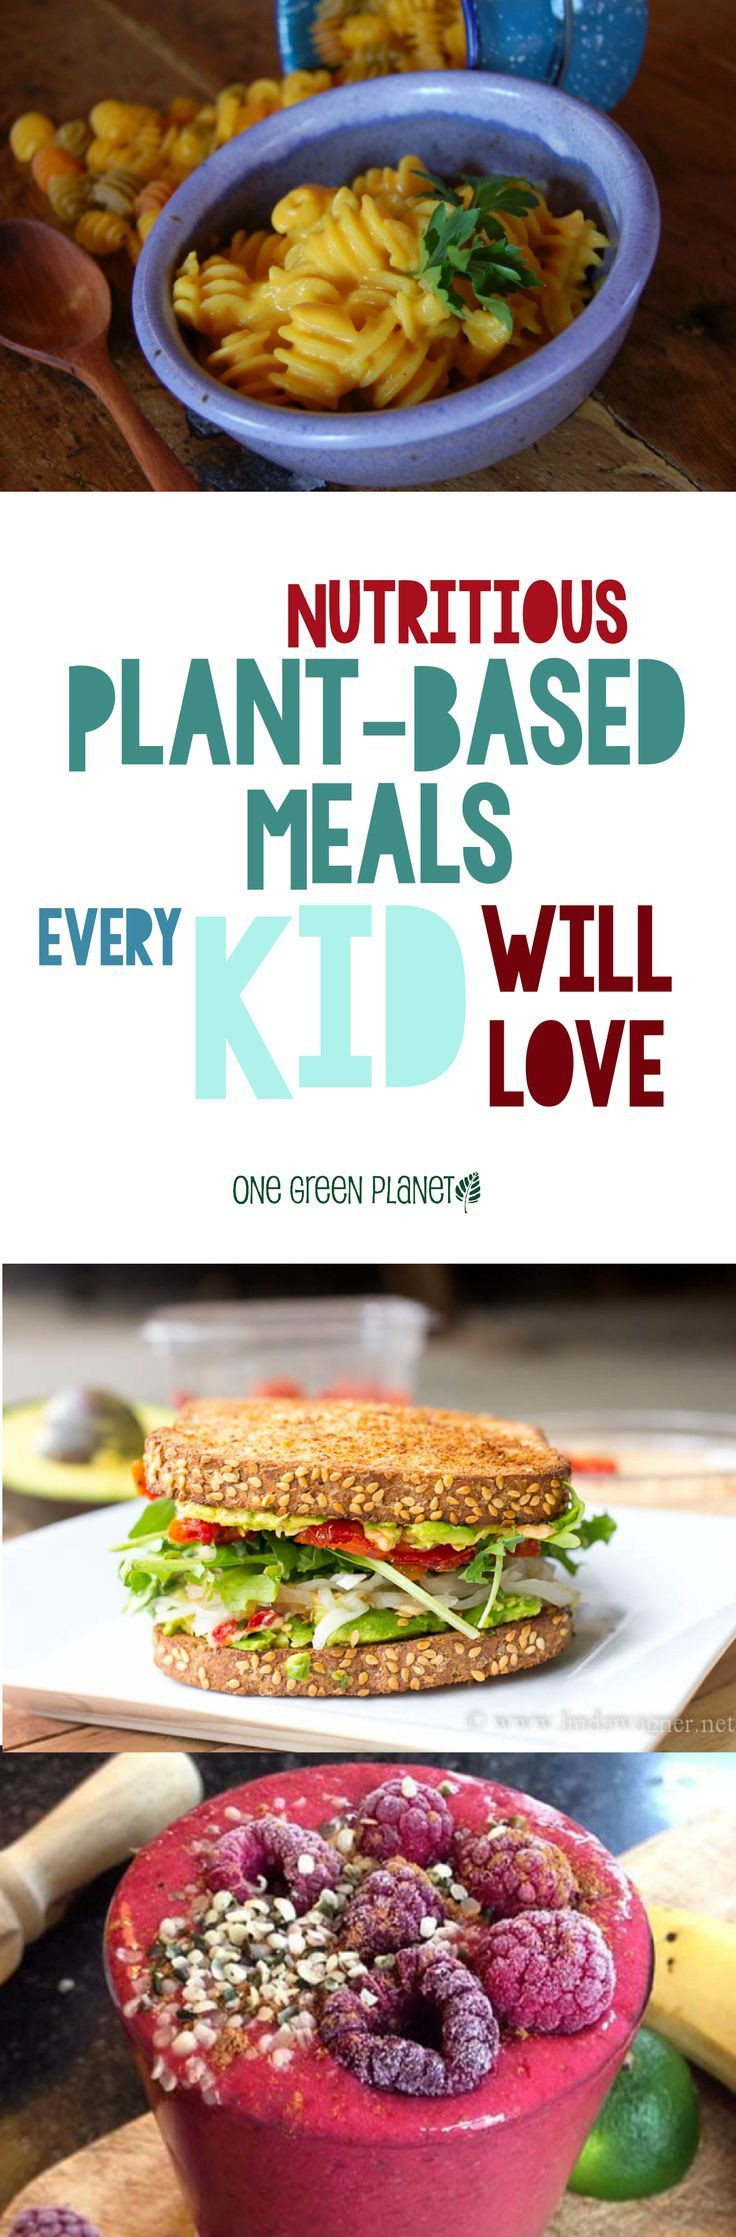 Plant Based Recipes For Kids
 Nutritious Plant Based Meals Every Kid Will Love